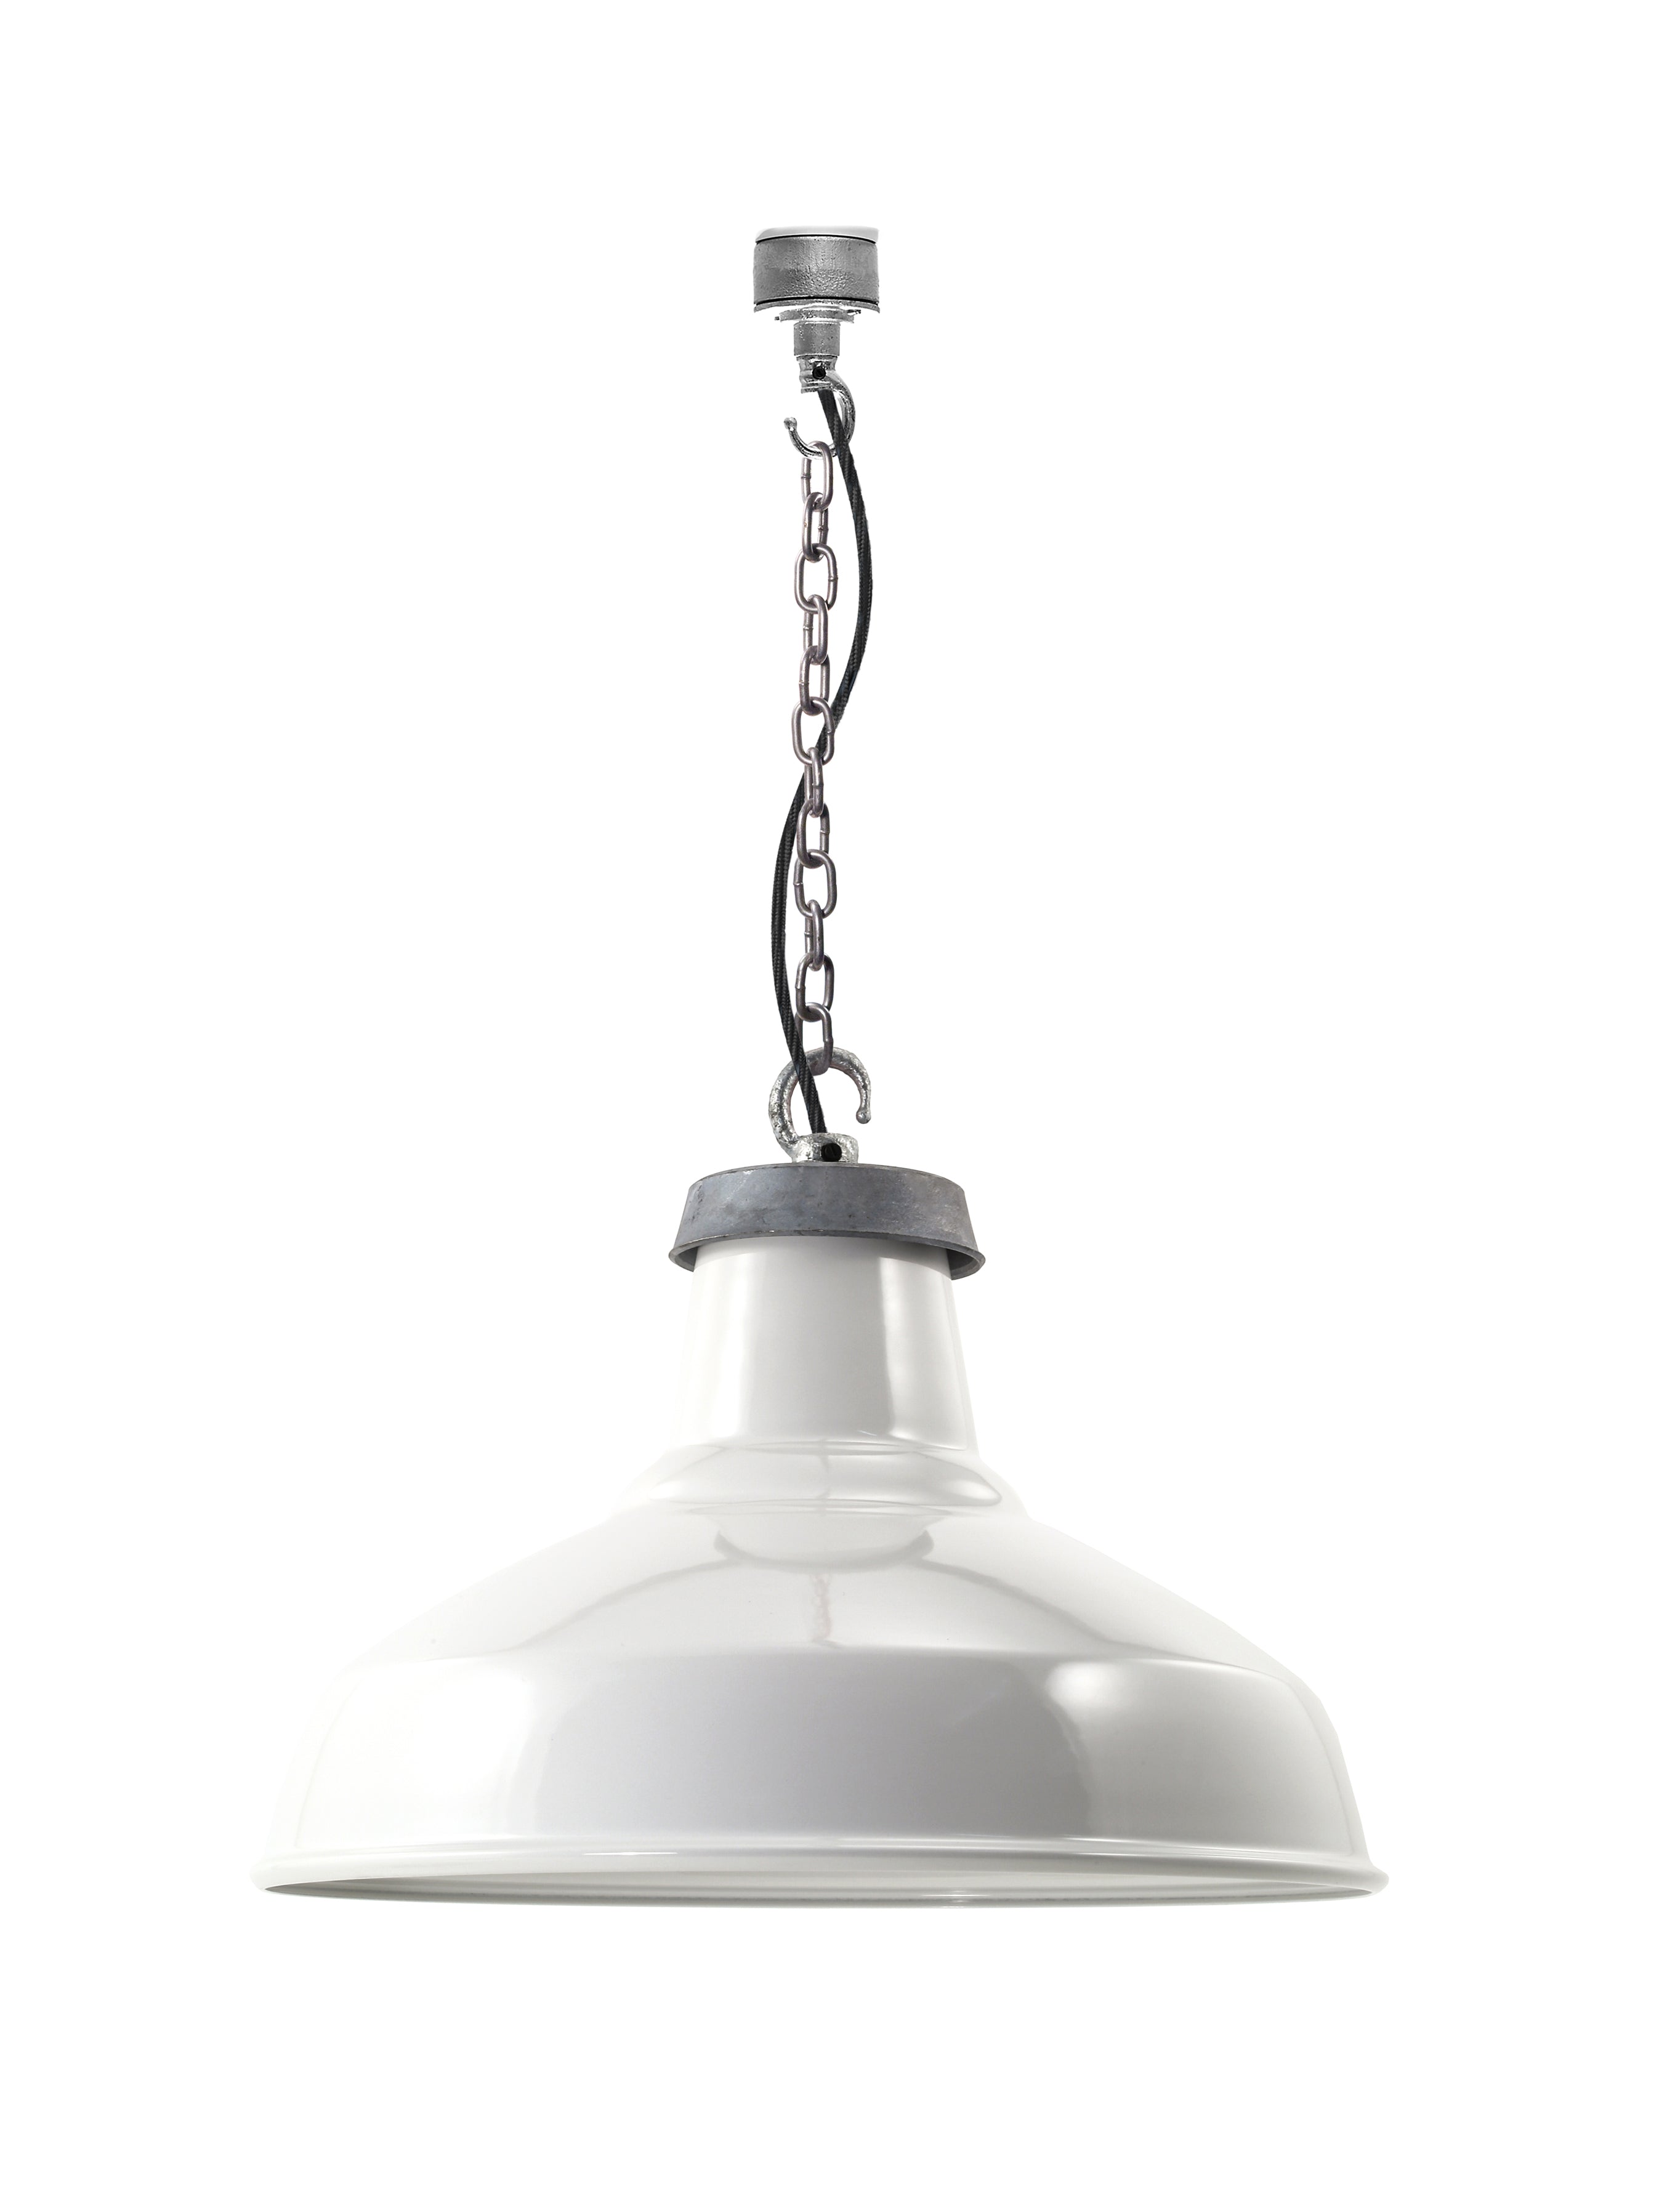 Gloss white enamel shade pendant, hanging with galvanised chain from a galvanised hook and ceiling rose. Fully assembled pendant has jet black round cable.